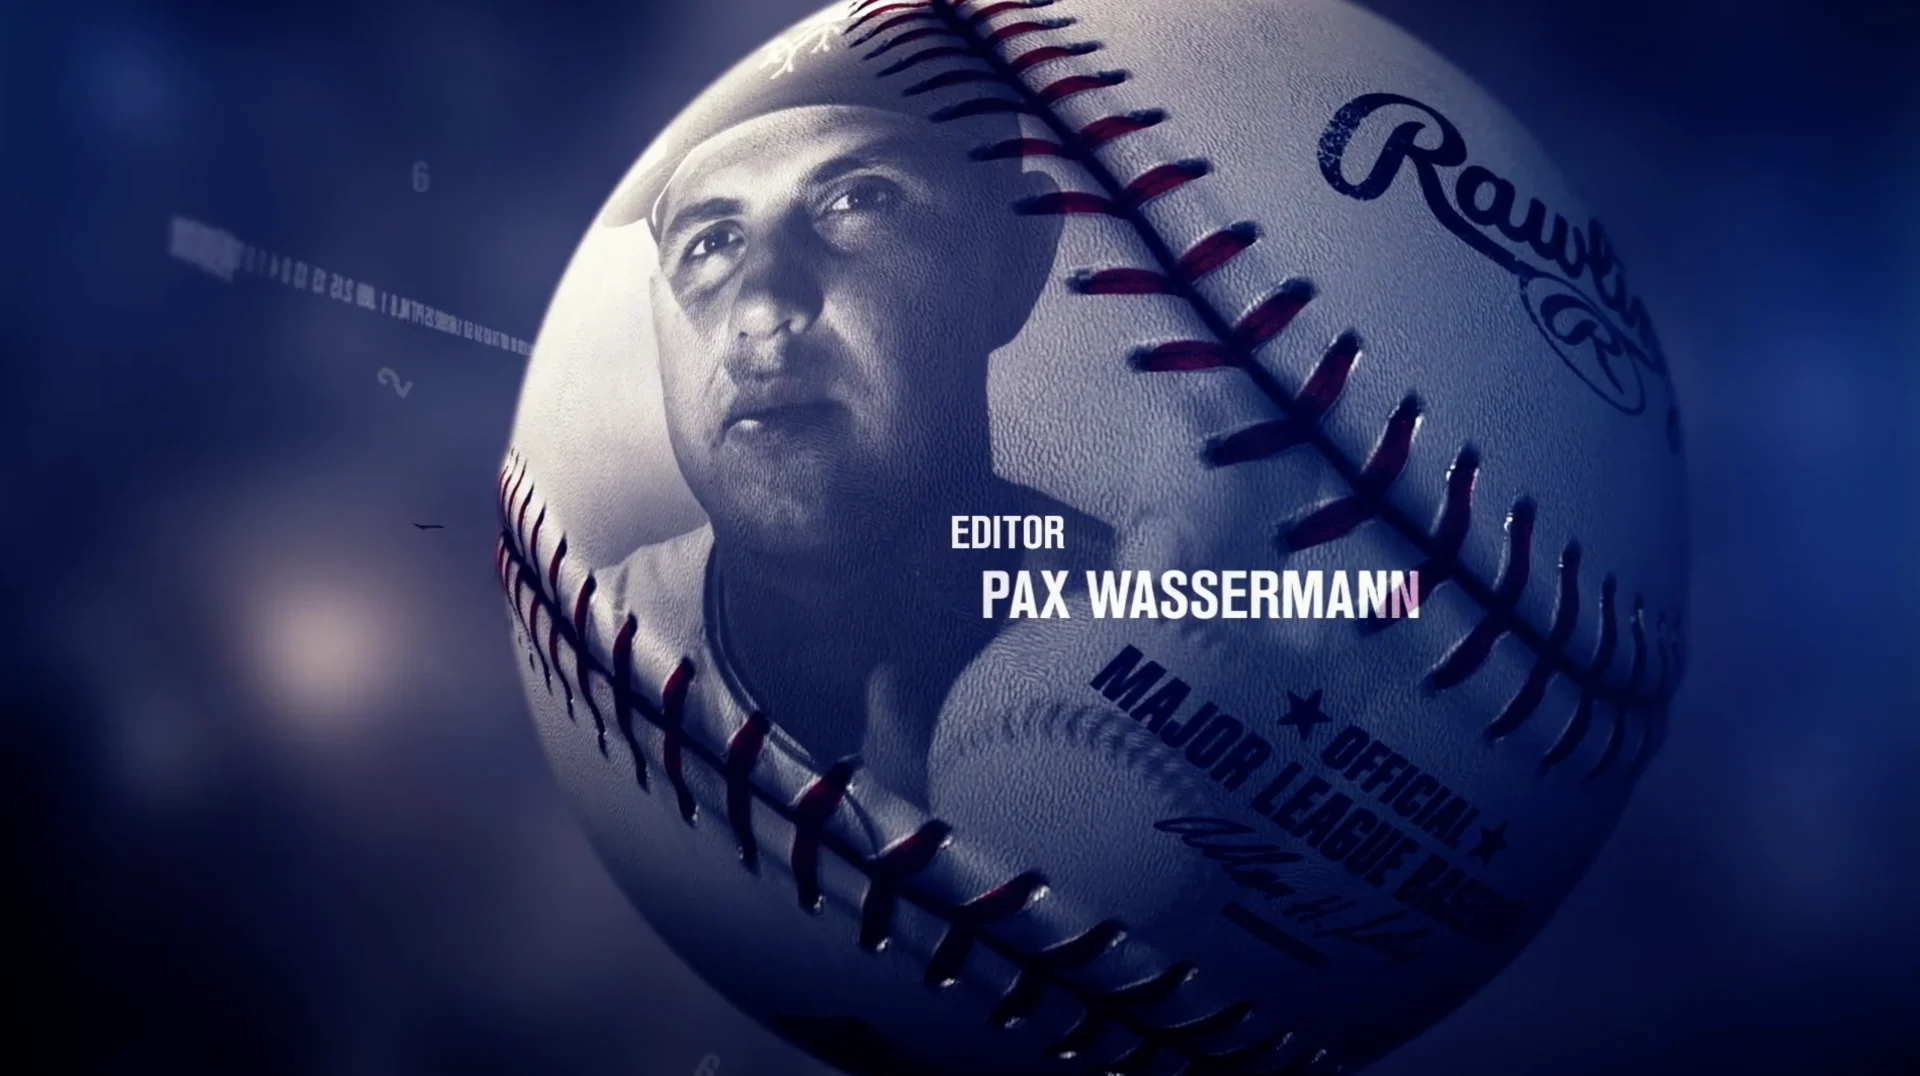 Acclaimed documentarians Ricki Stern and Annie Sundberg came to BigStar to create the opening title sequence for their new film. Our goal was to execute a piece highlighting the rarity of the knuckleball and the pitchers who are known for it. 